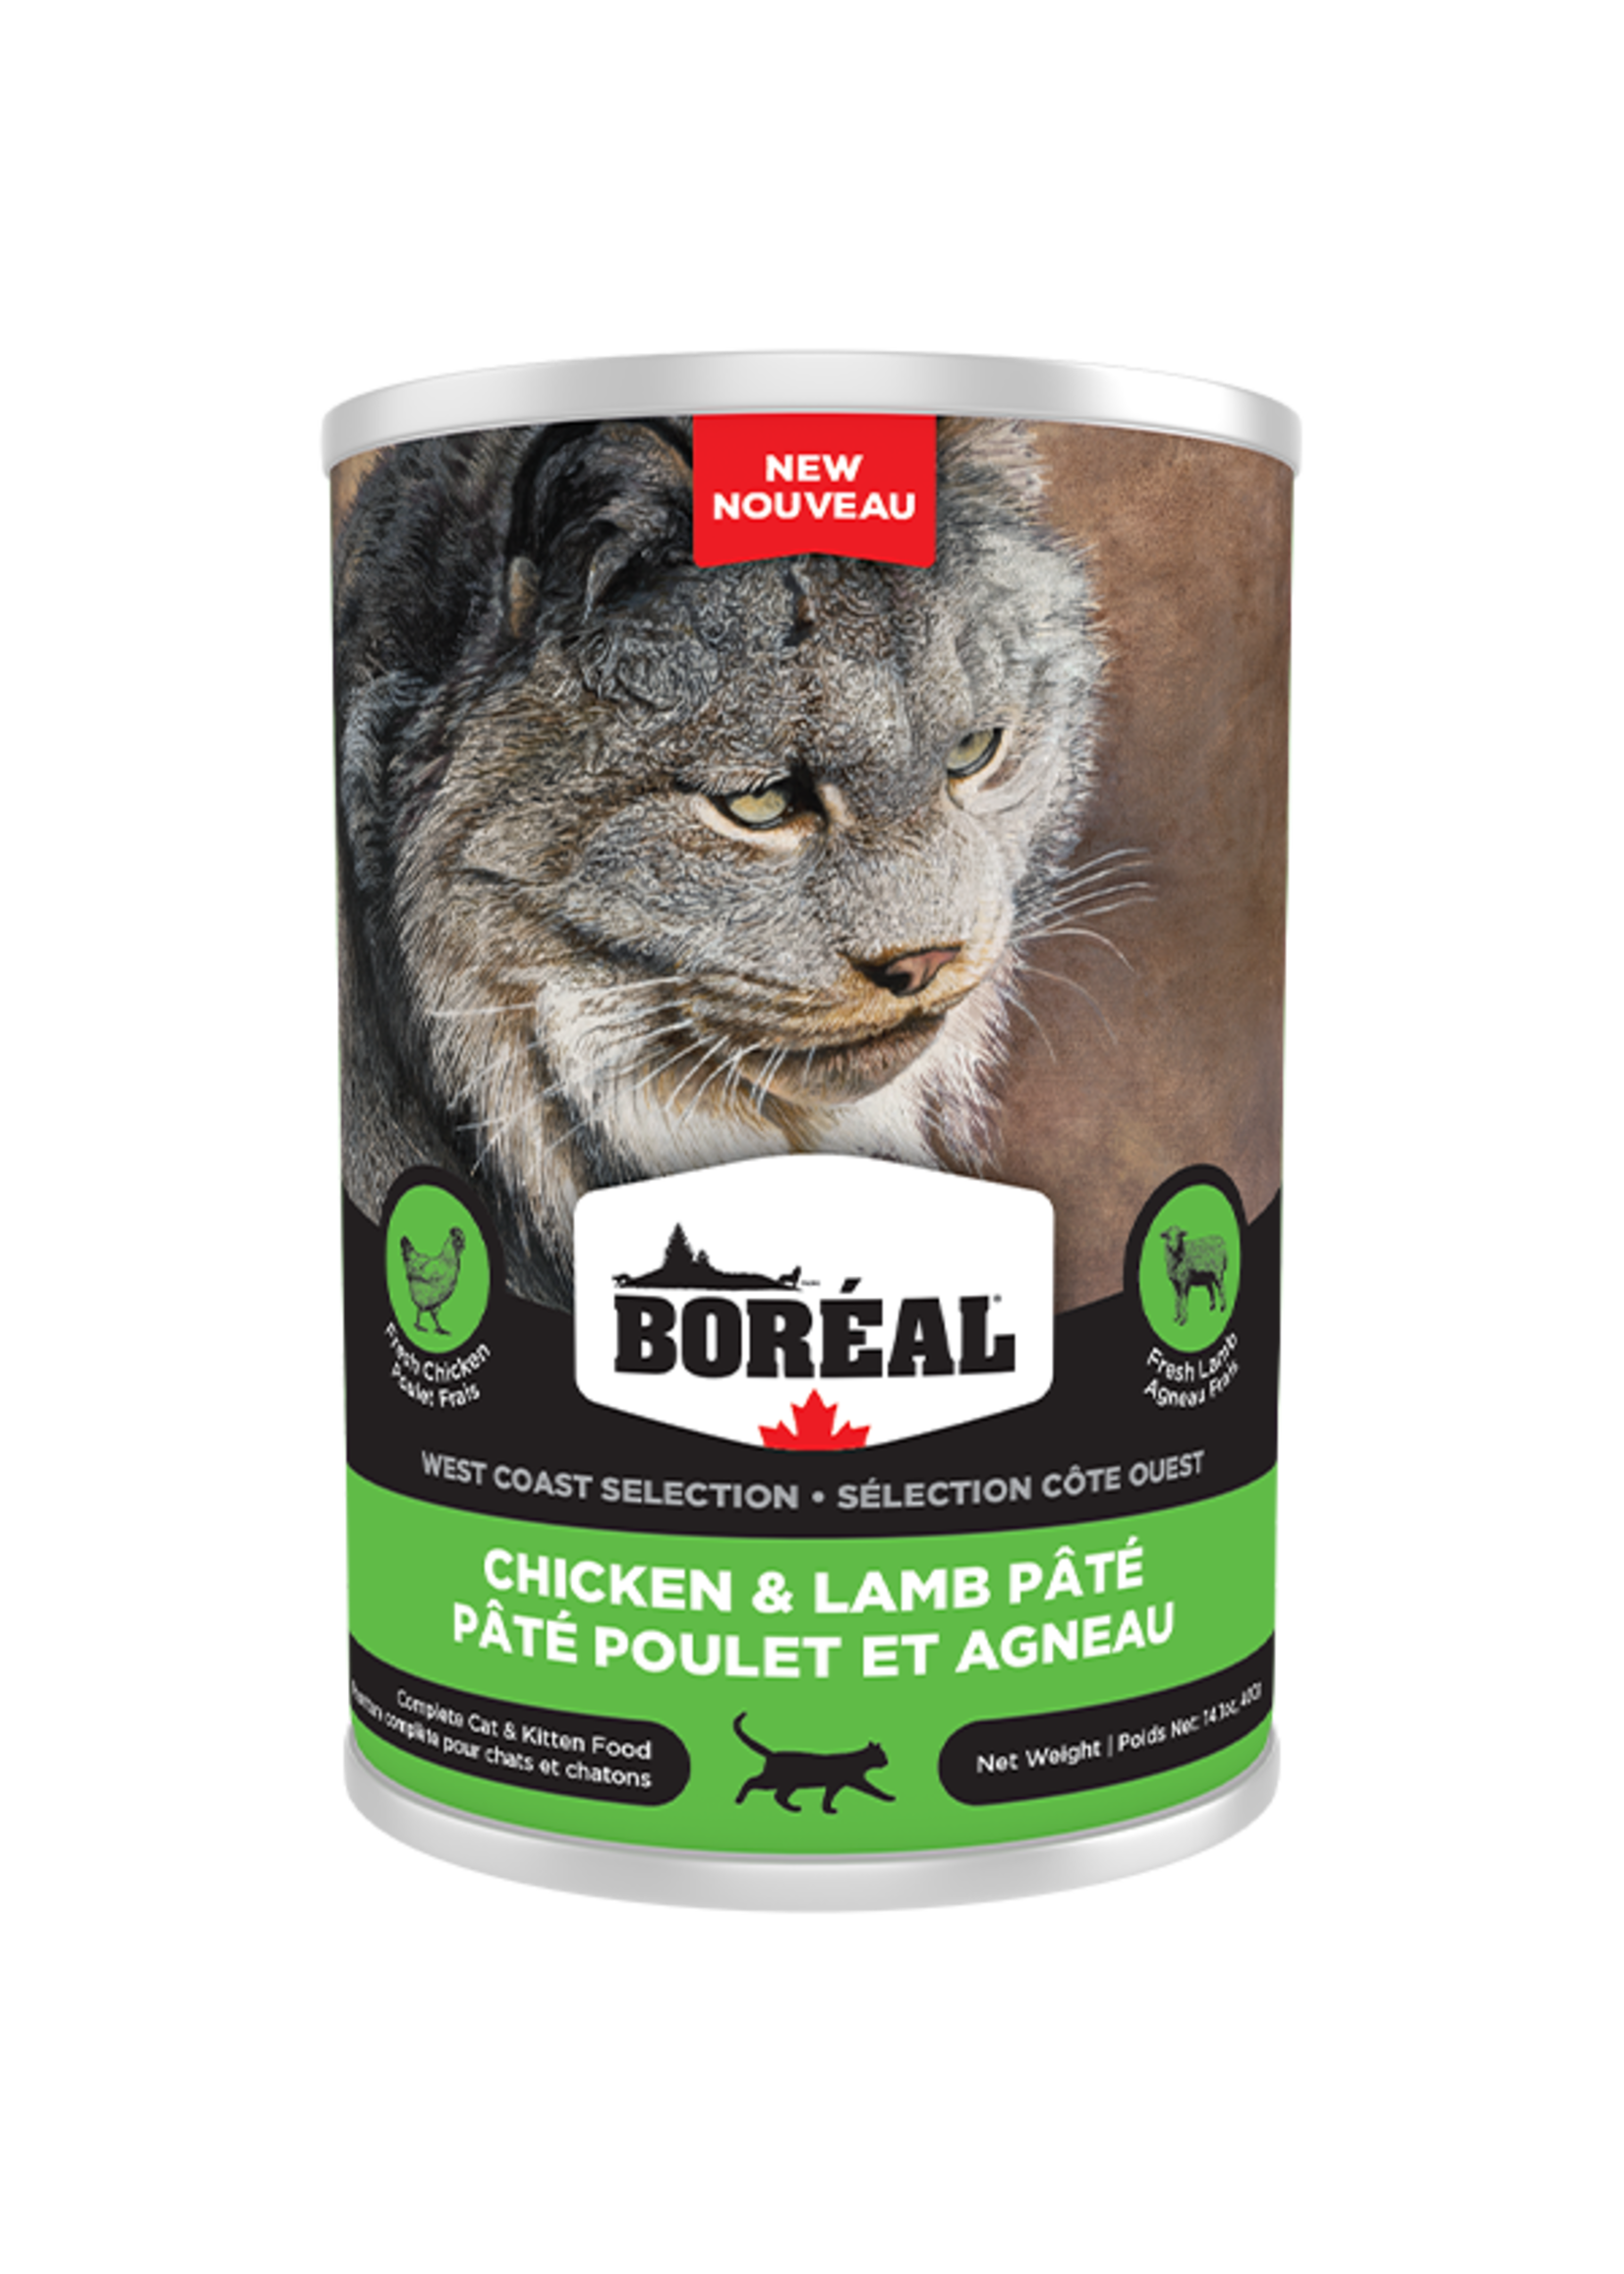 Boreal Boreal West Coast - Chicken and Lamb Pate 400g Cat